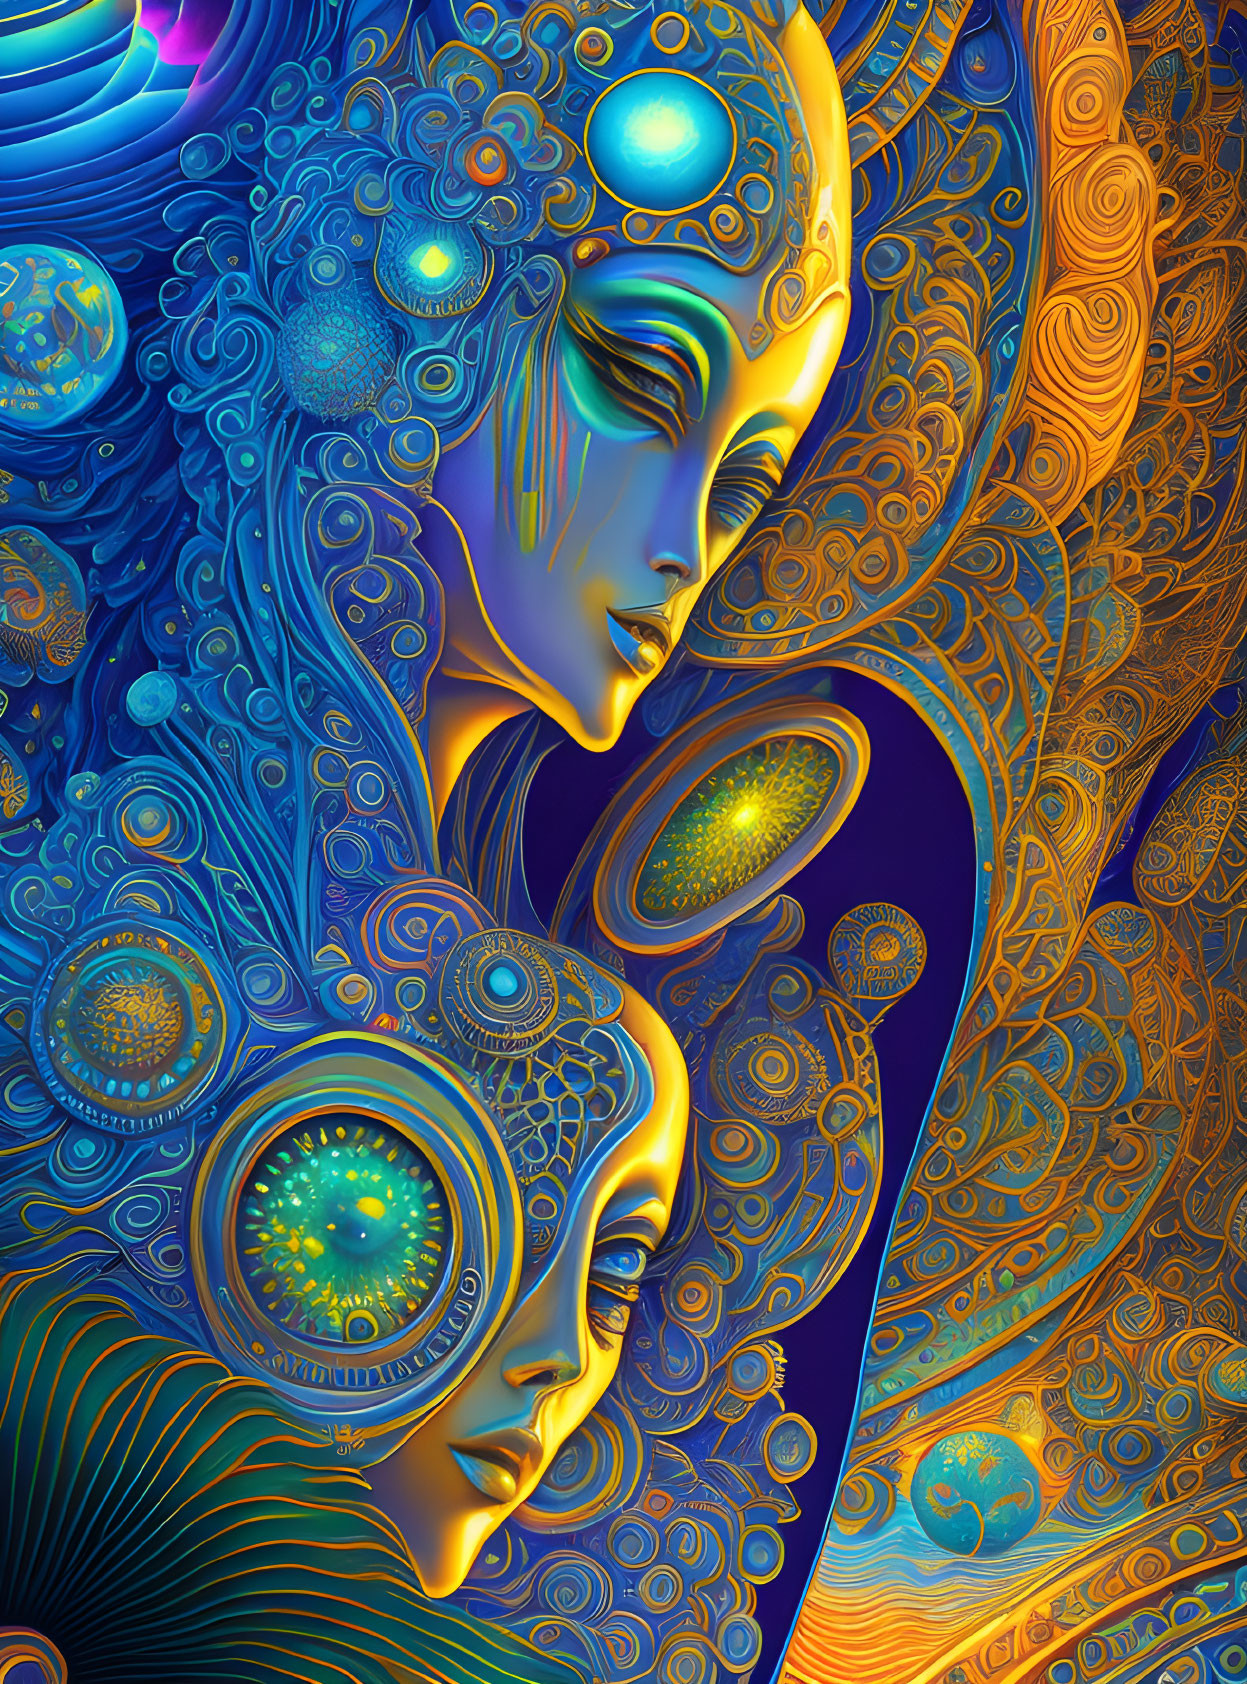 Vivid digital artwork of two faces with intricate patterns in blue and gold tones